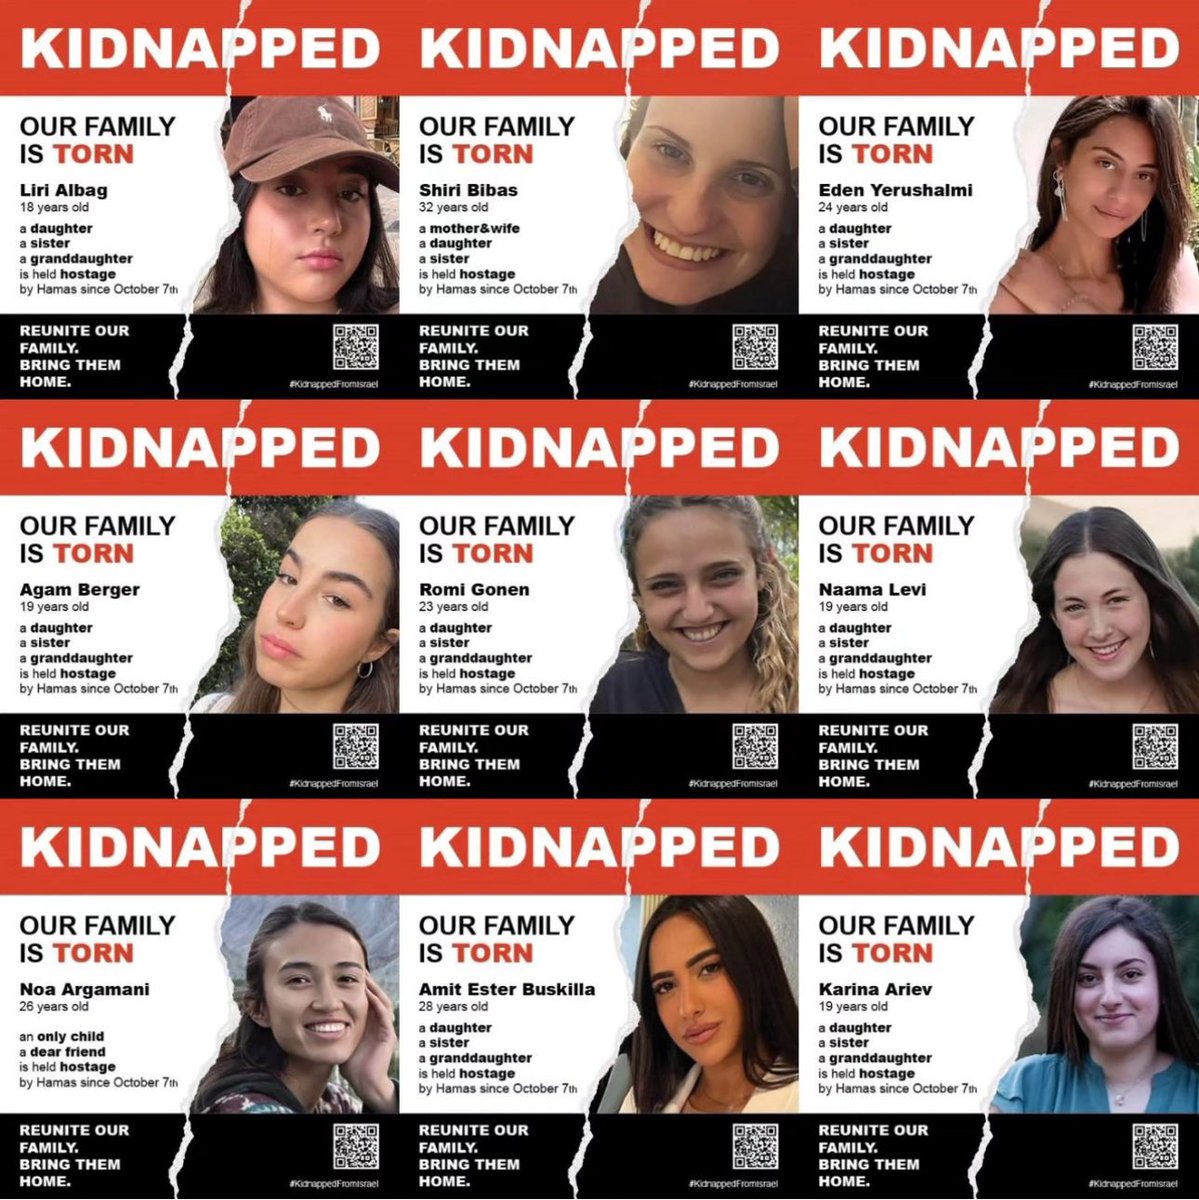 I don't want to hear anything about #WomensHistoryMonth unless we also mention the girls, women, and mothers who have been kidnapped in Gaza since 10/7. If you don't bring attention to them along with #WomensHistoryMonth, you don't care about women. It’s day 147!!! Say